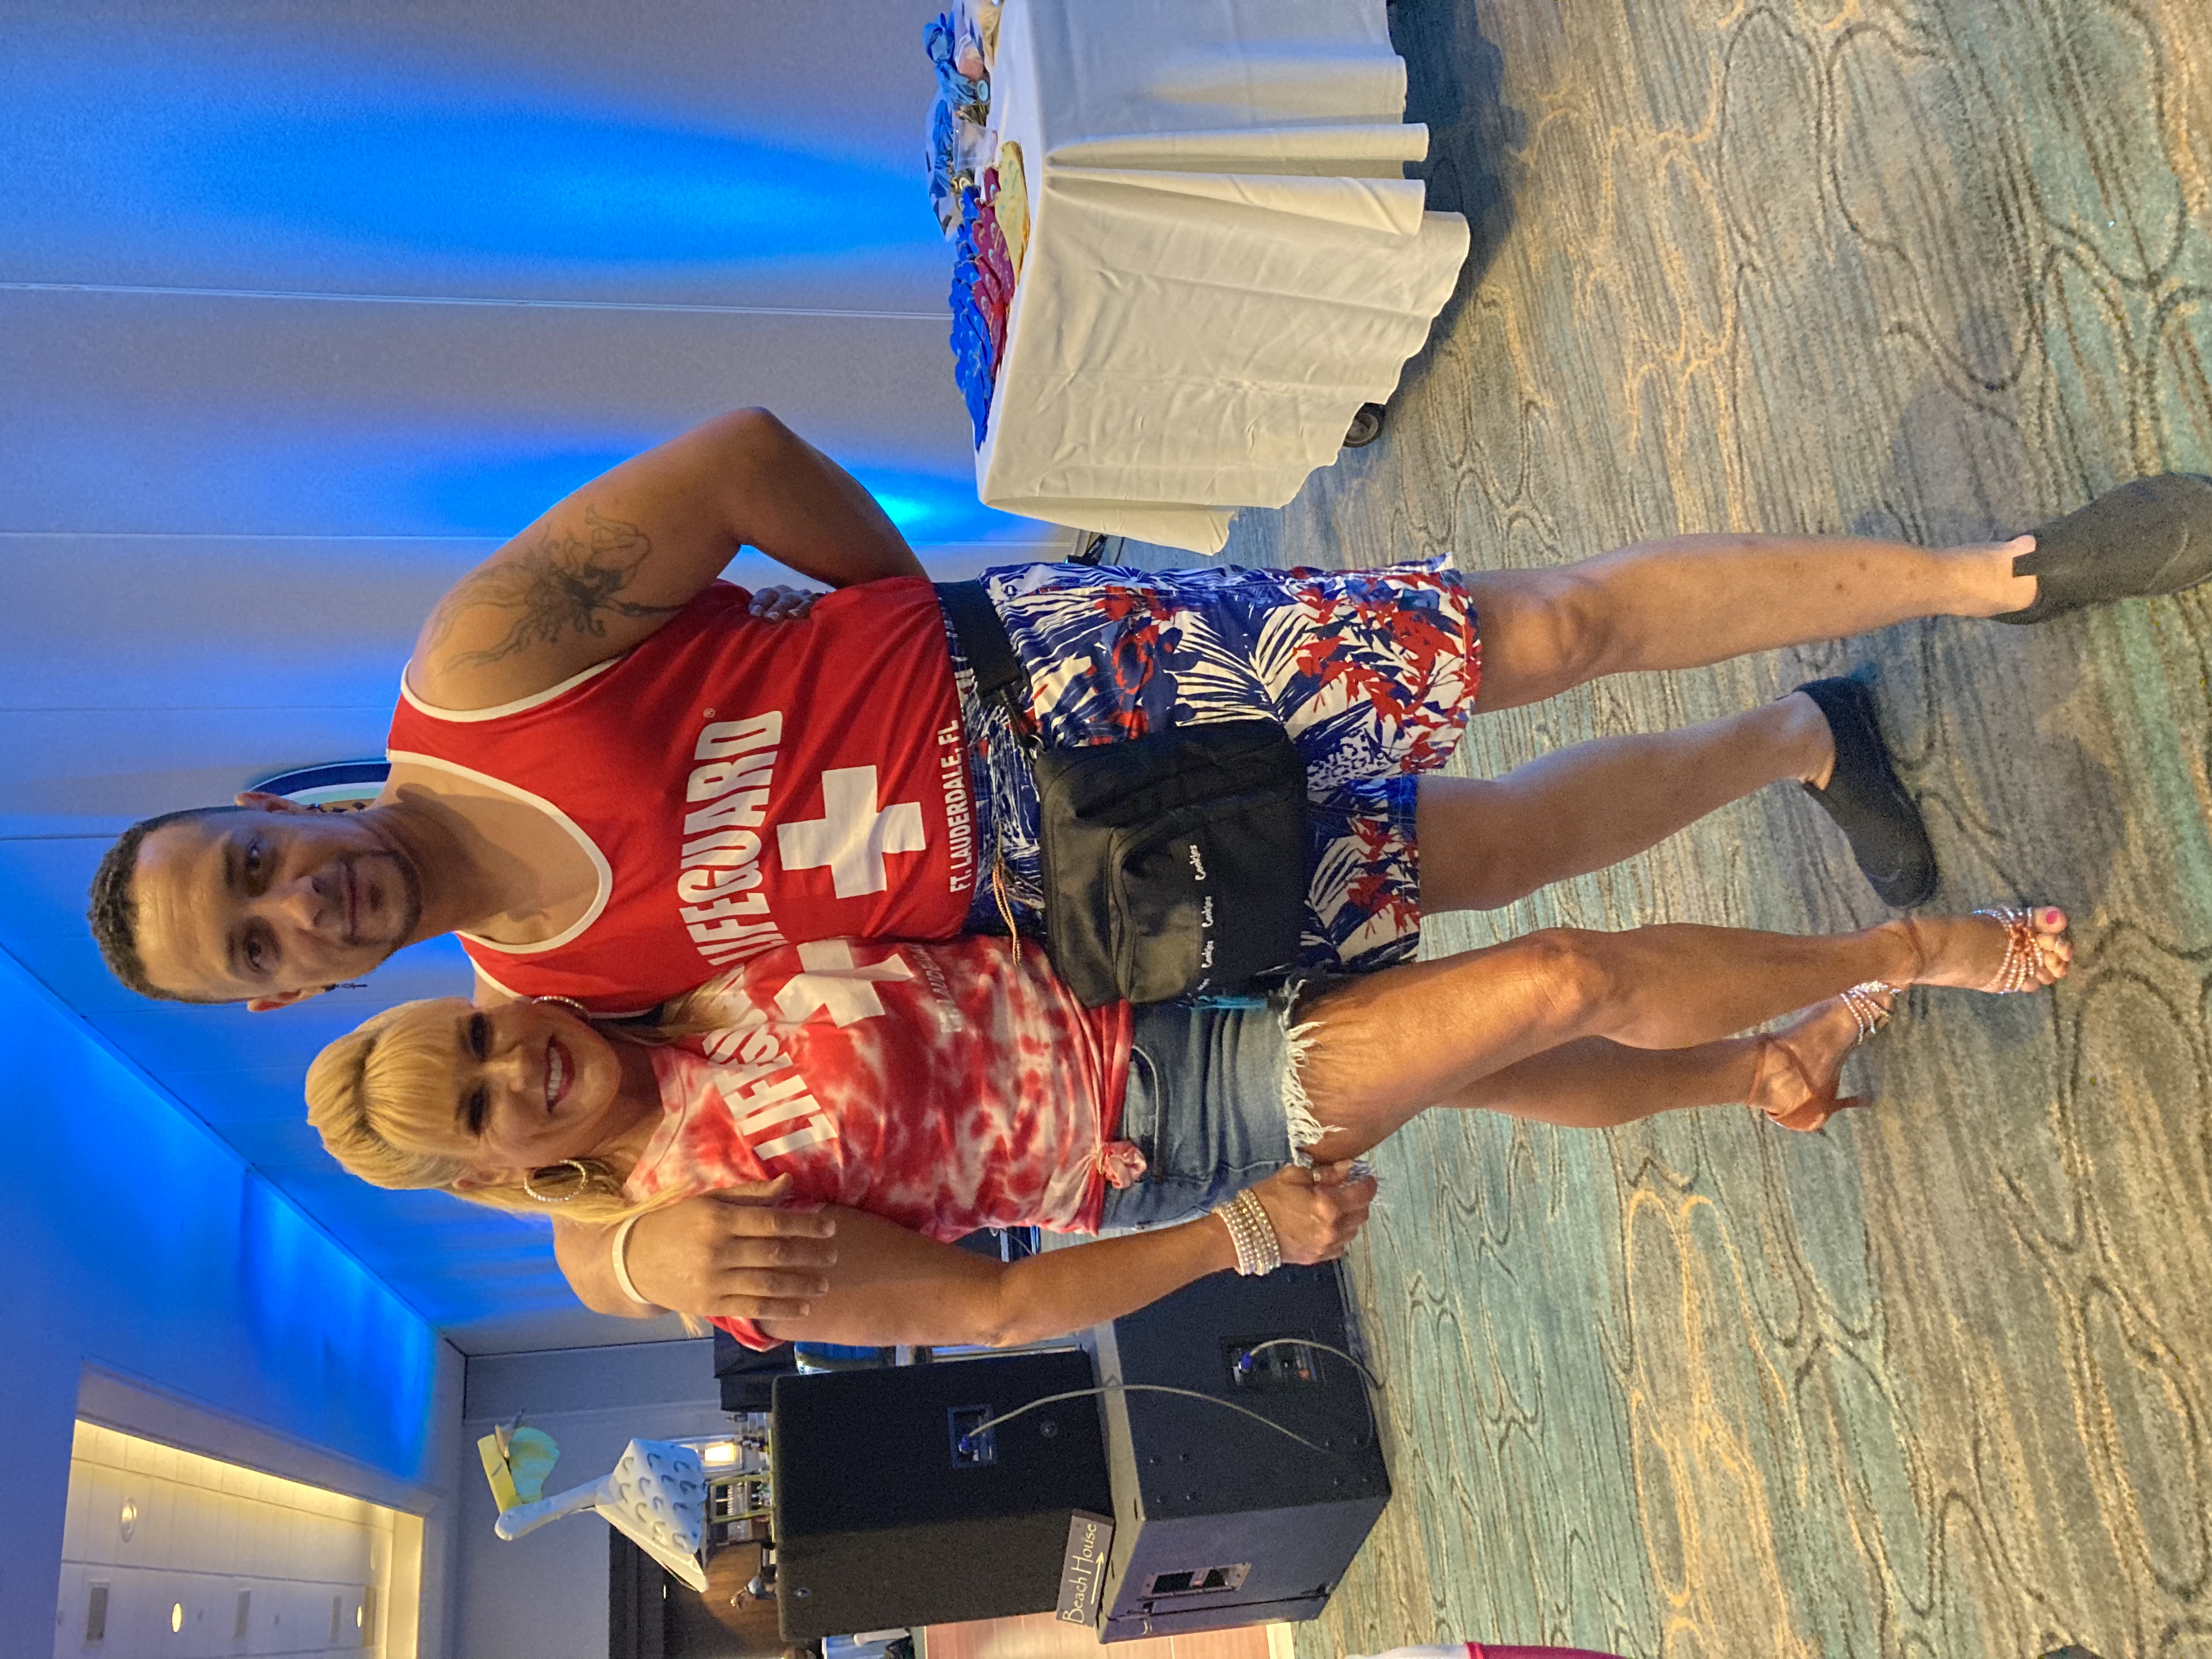 Our favorite ”lifeguards” Tanya and Primo at the beach-themed Nightclub dance event